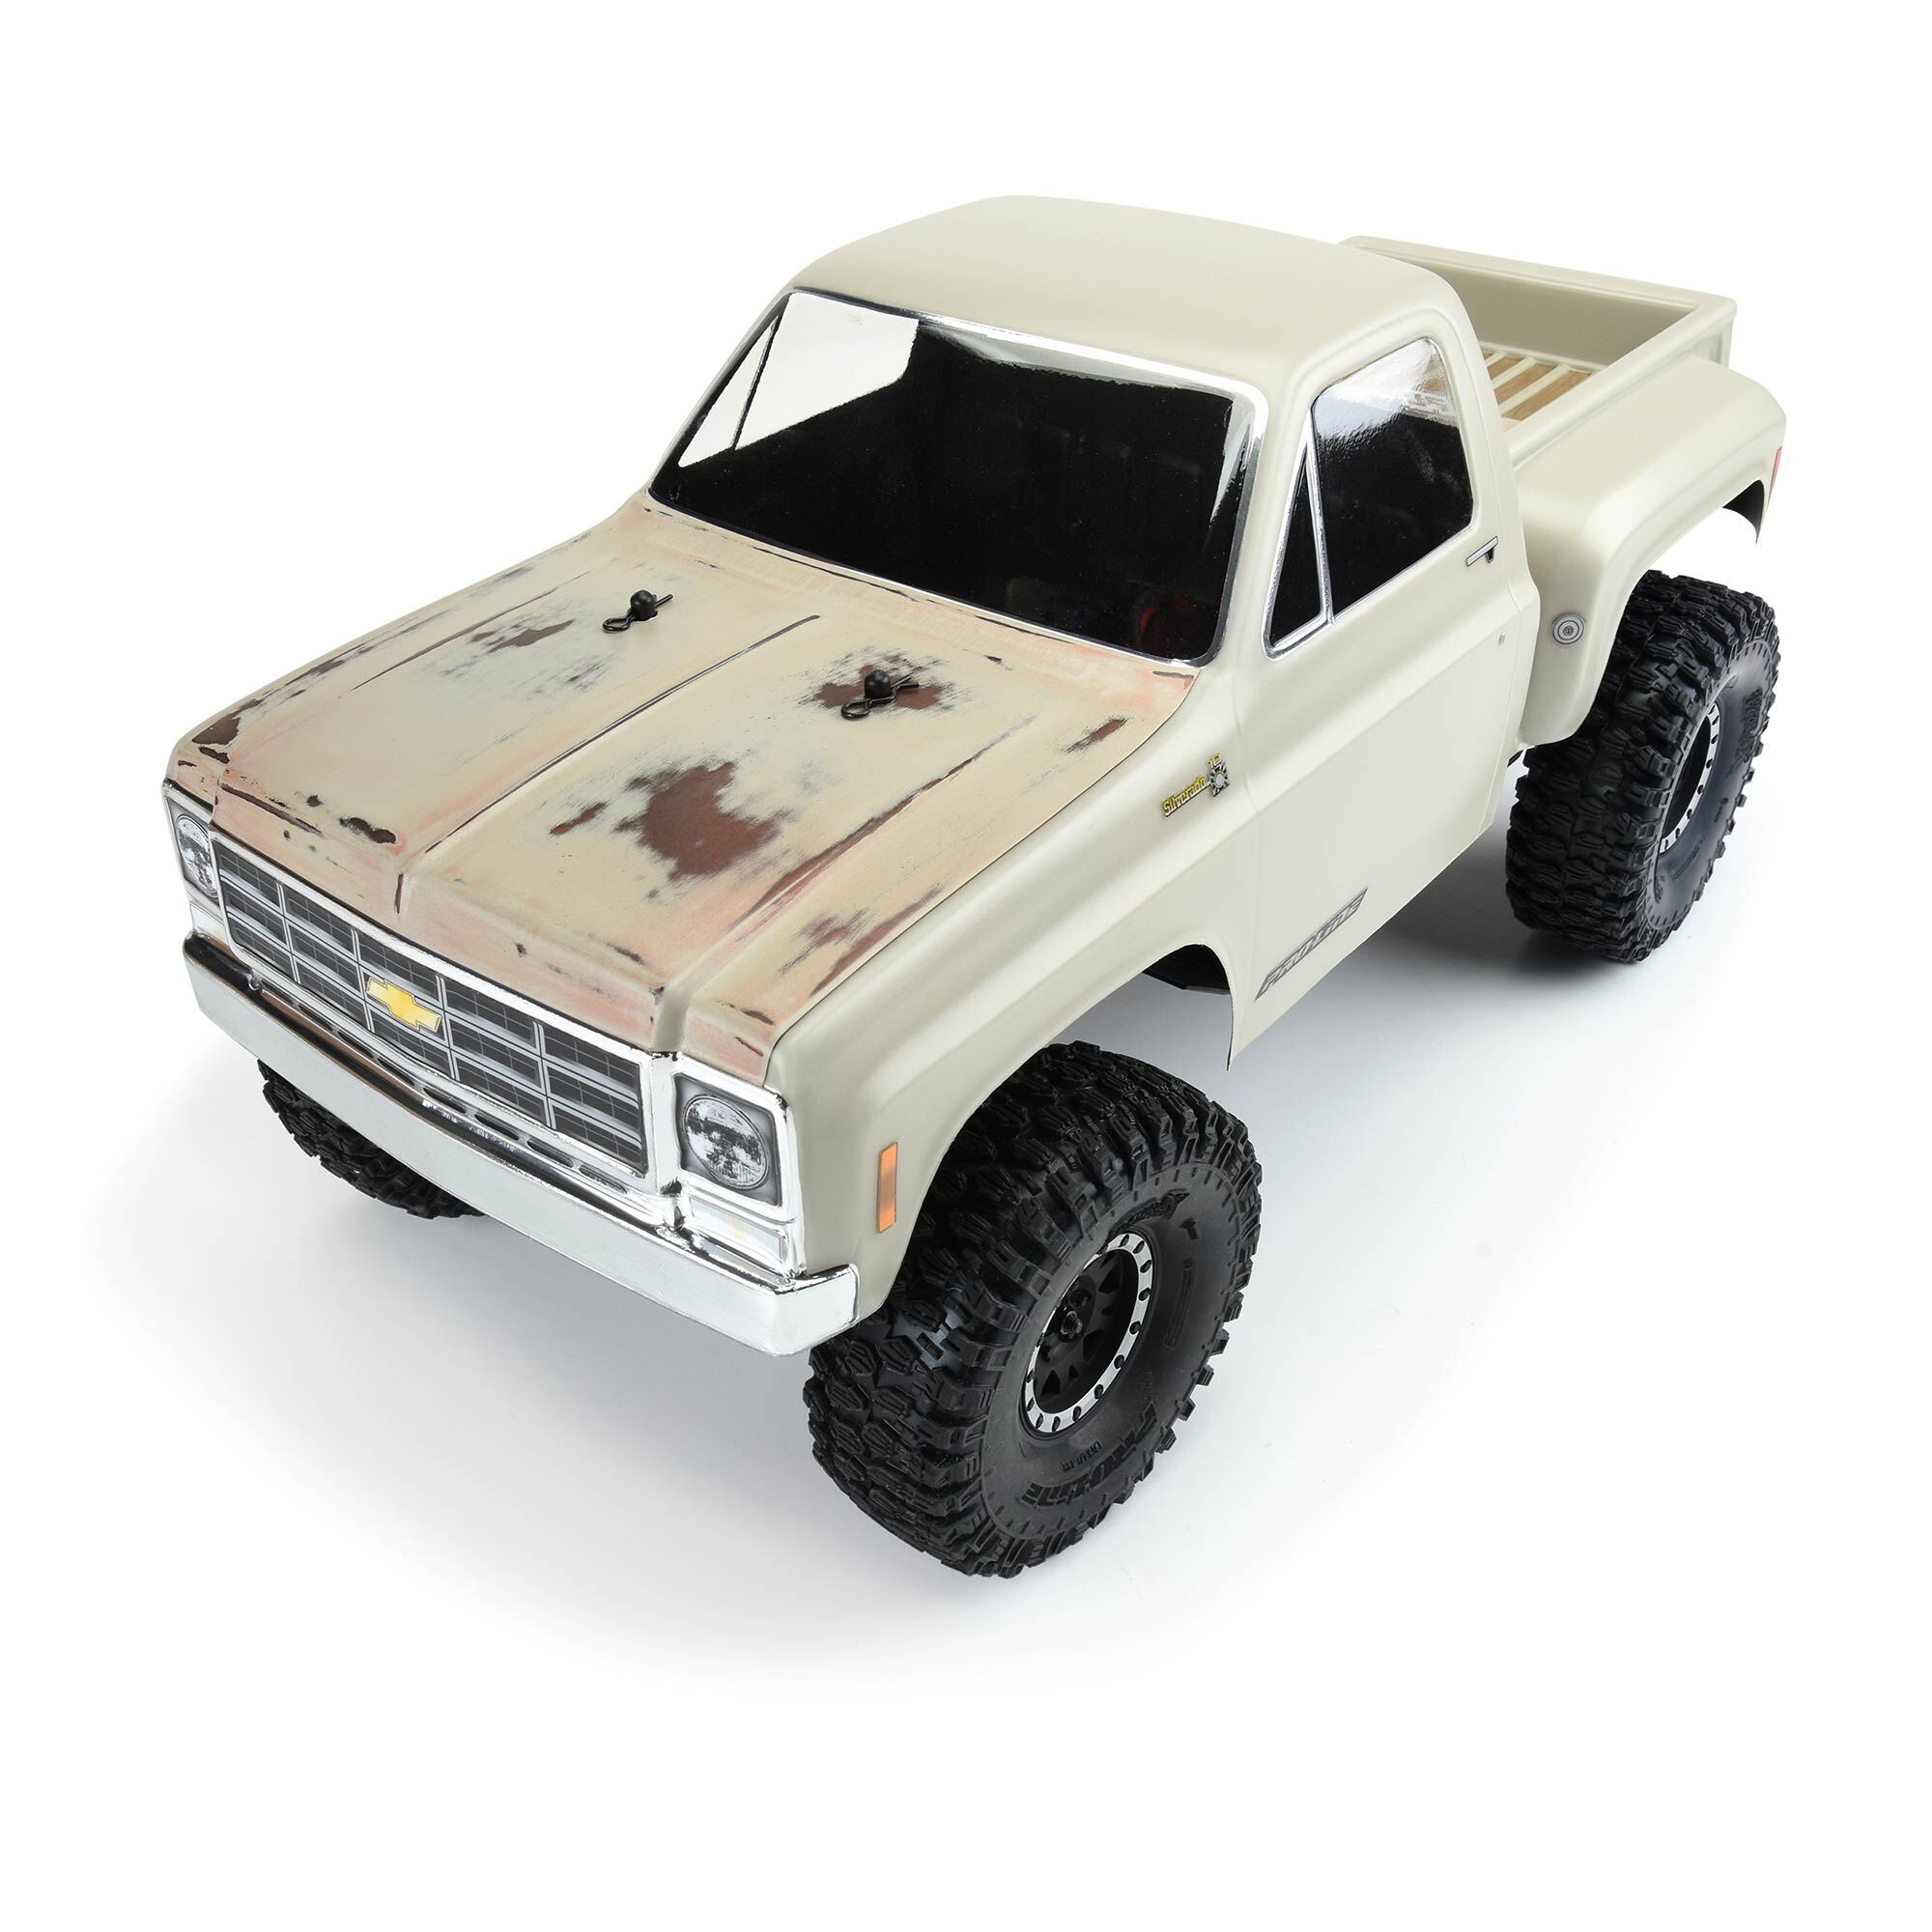 Pro-Line Racing 1/10 1978 Chevy K-10 Clear Body 12.3